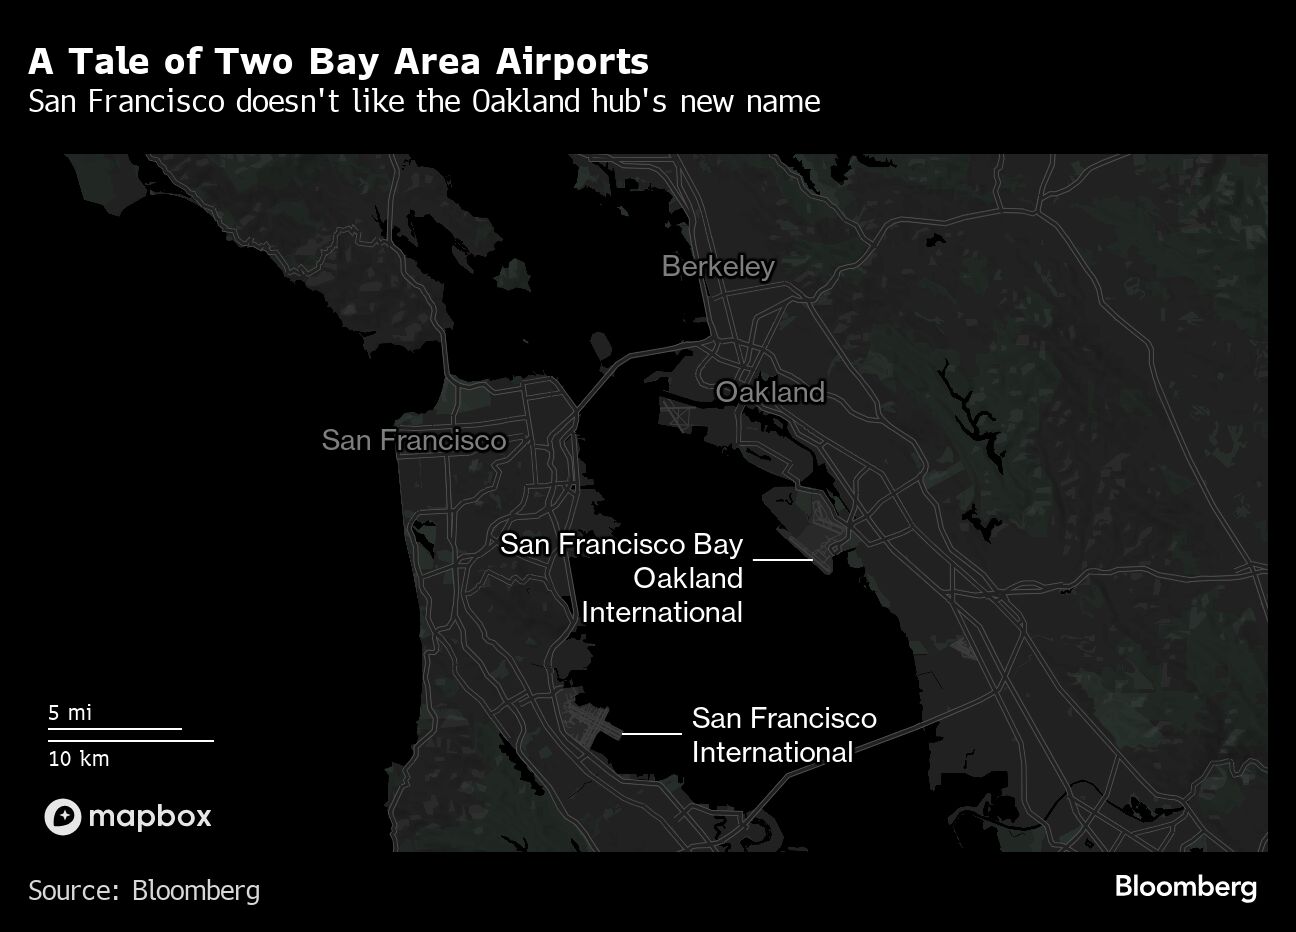 san francisco fumes over oakland airport’s new name